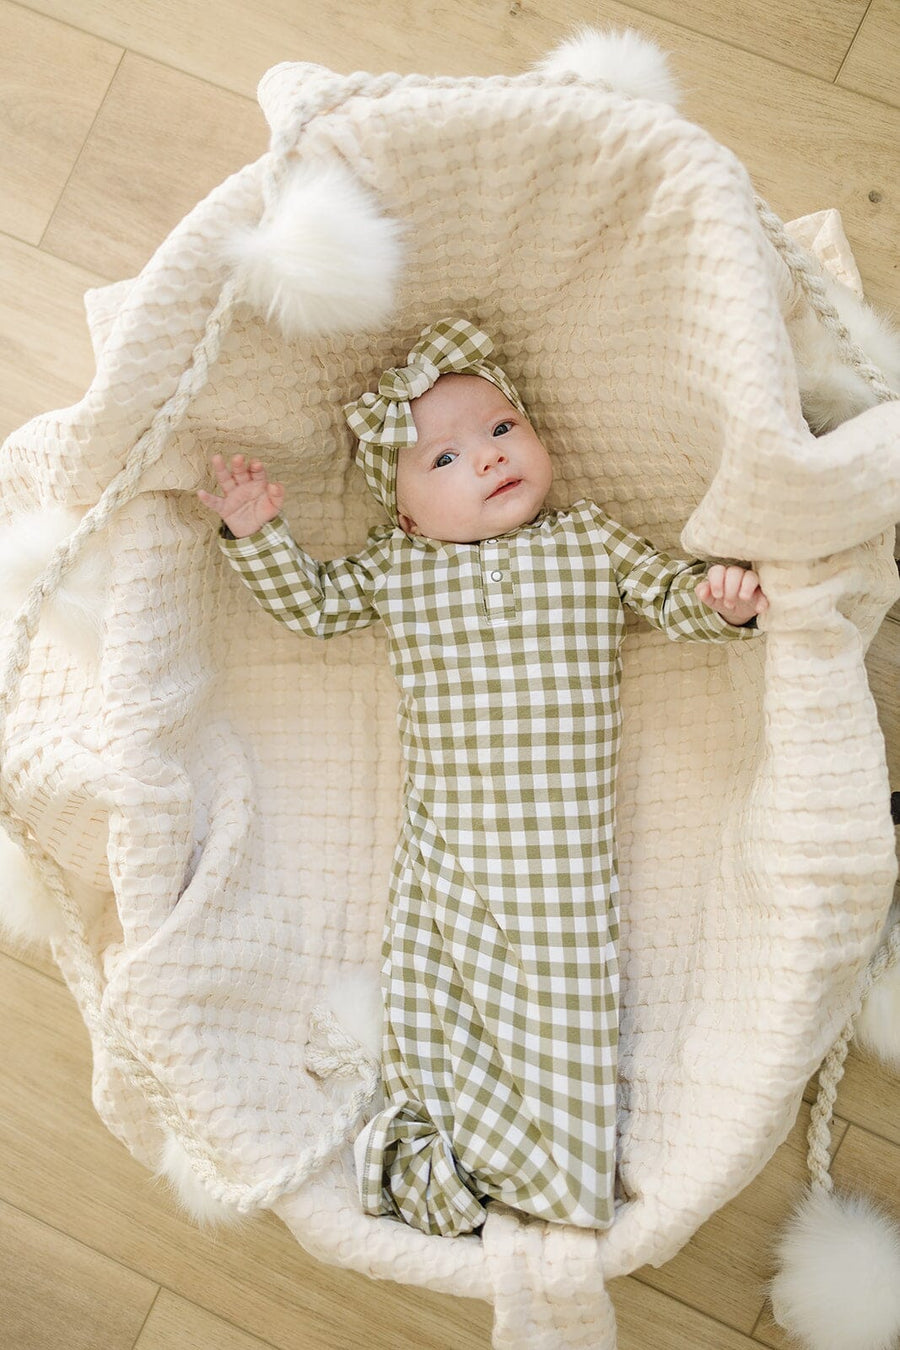 Green Gingham Knot Gown Mebie Baby 